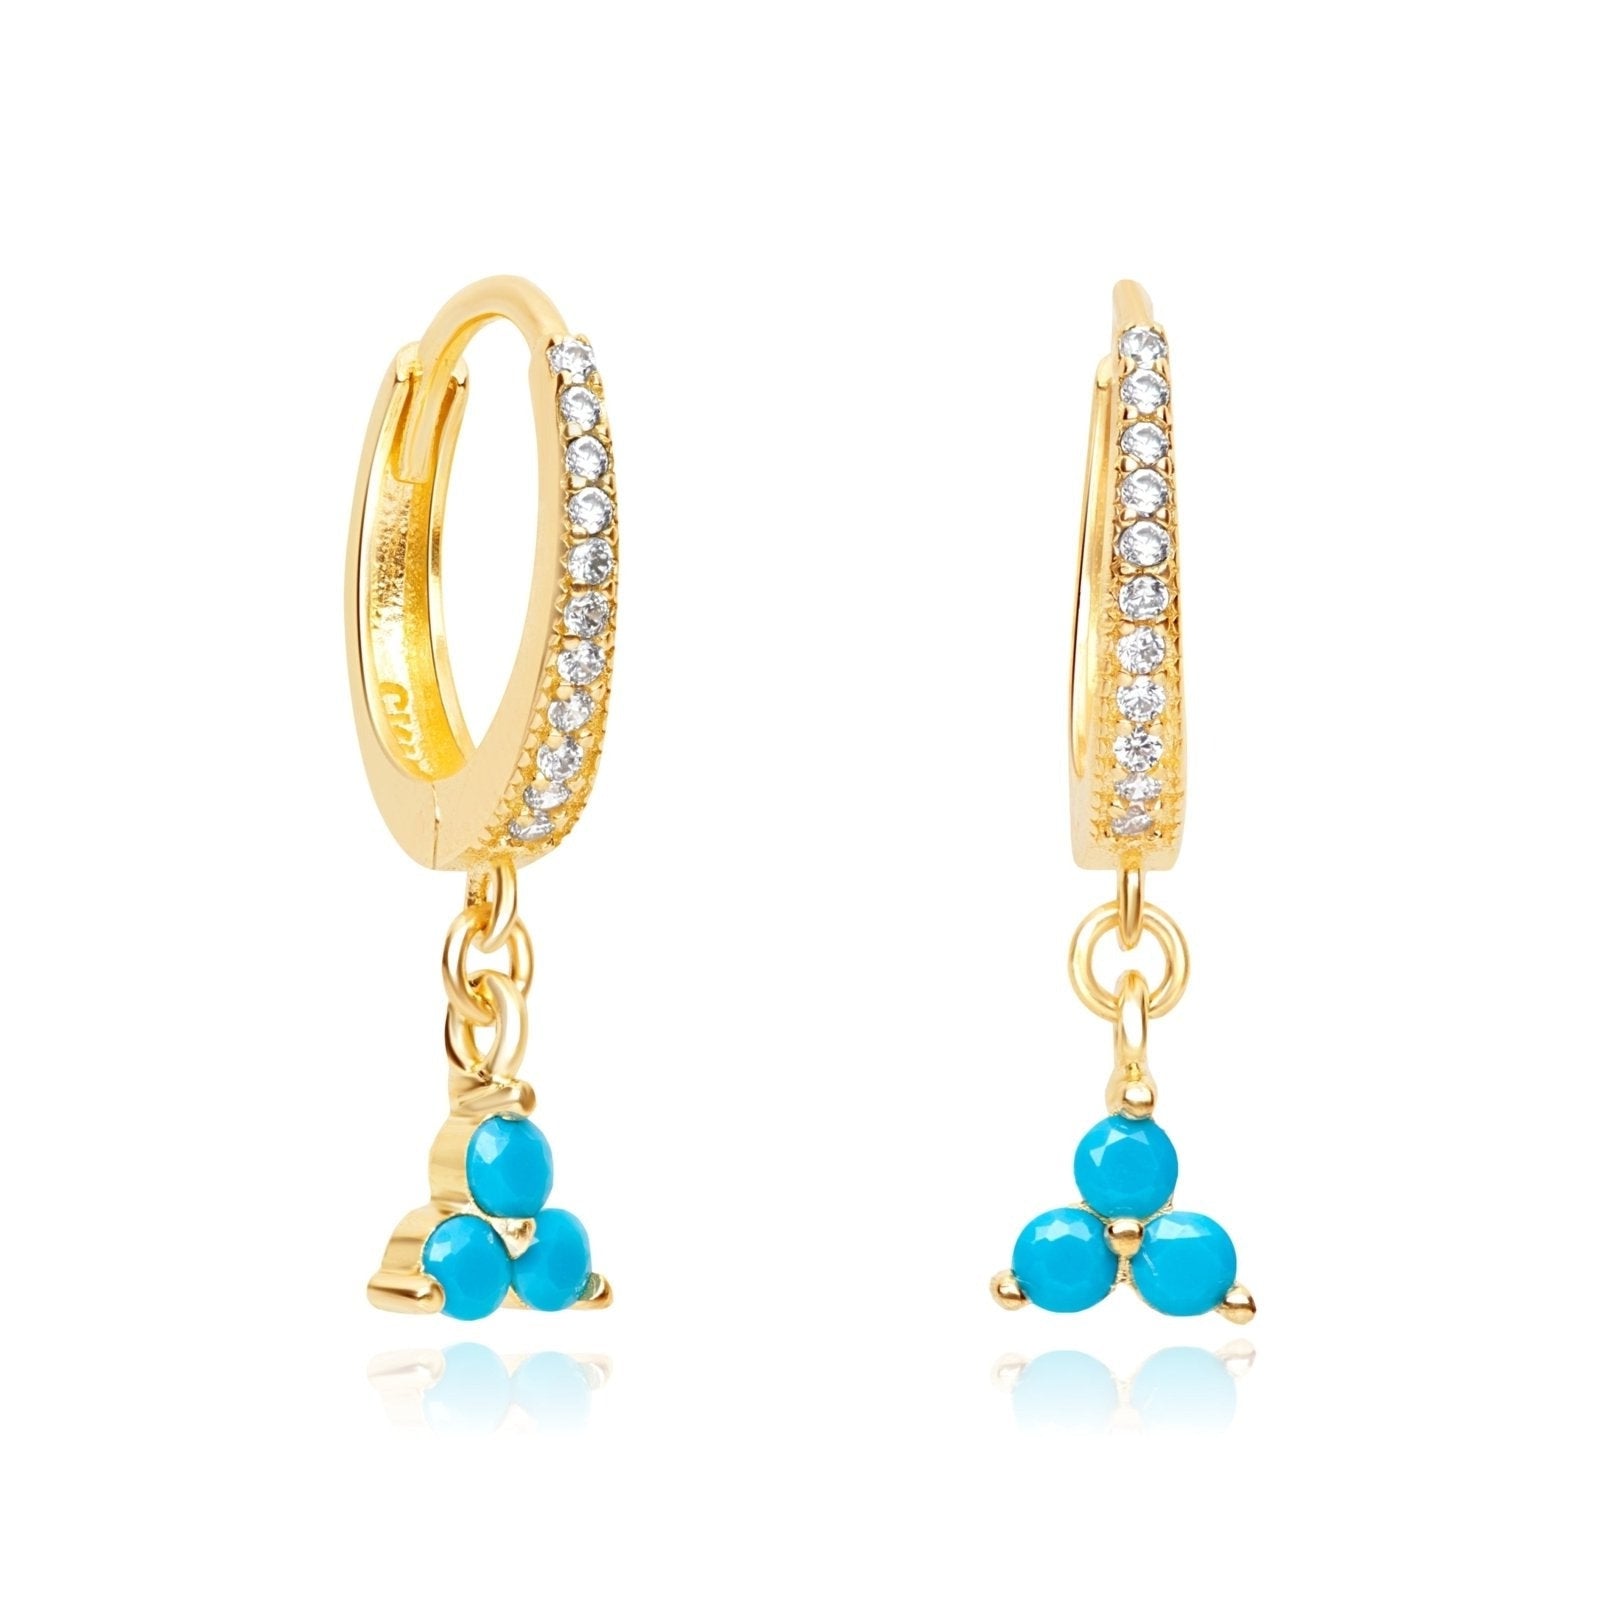 Turquoise Trinity Cluster Drop Hoops Earrings Estella Collection #product_description# 14k Birthstone Dangle Earrings #tag4# #tag5# #tag6# #tag7# #tag8# #tag9# #tag10#